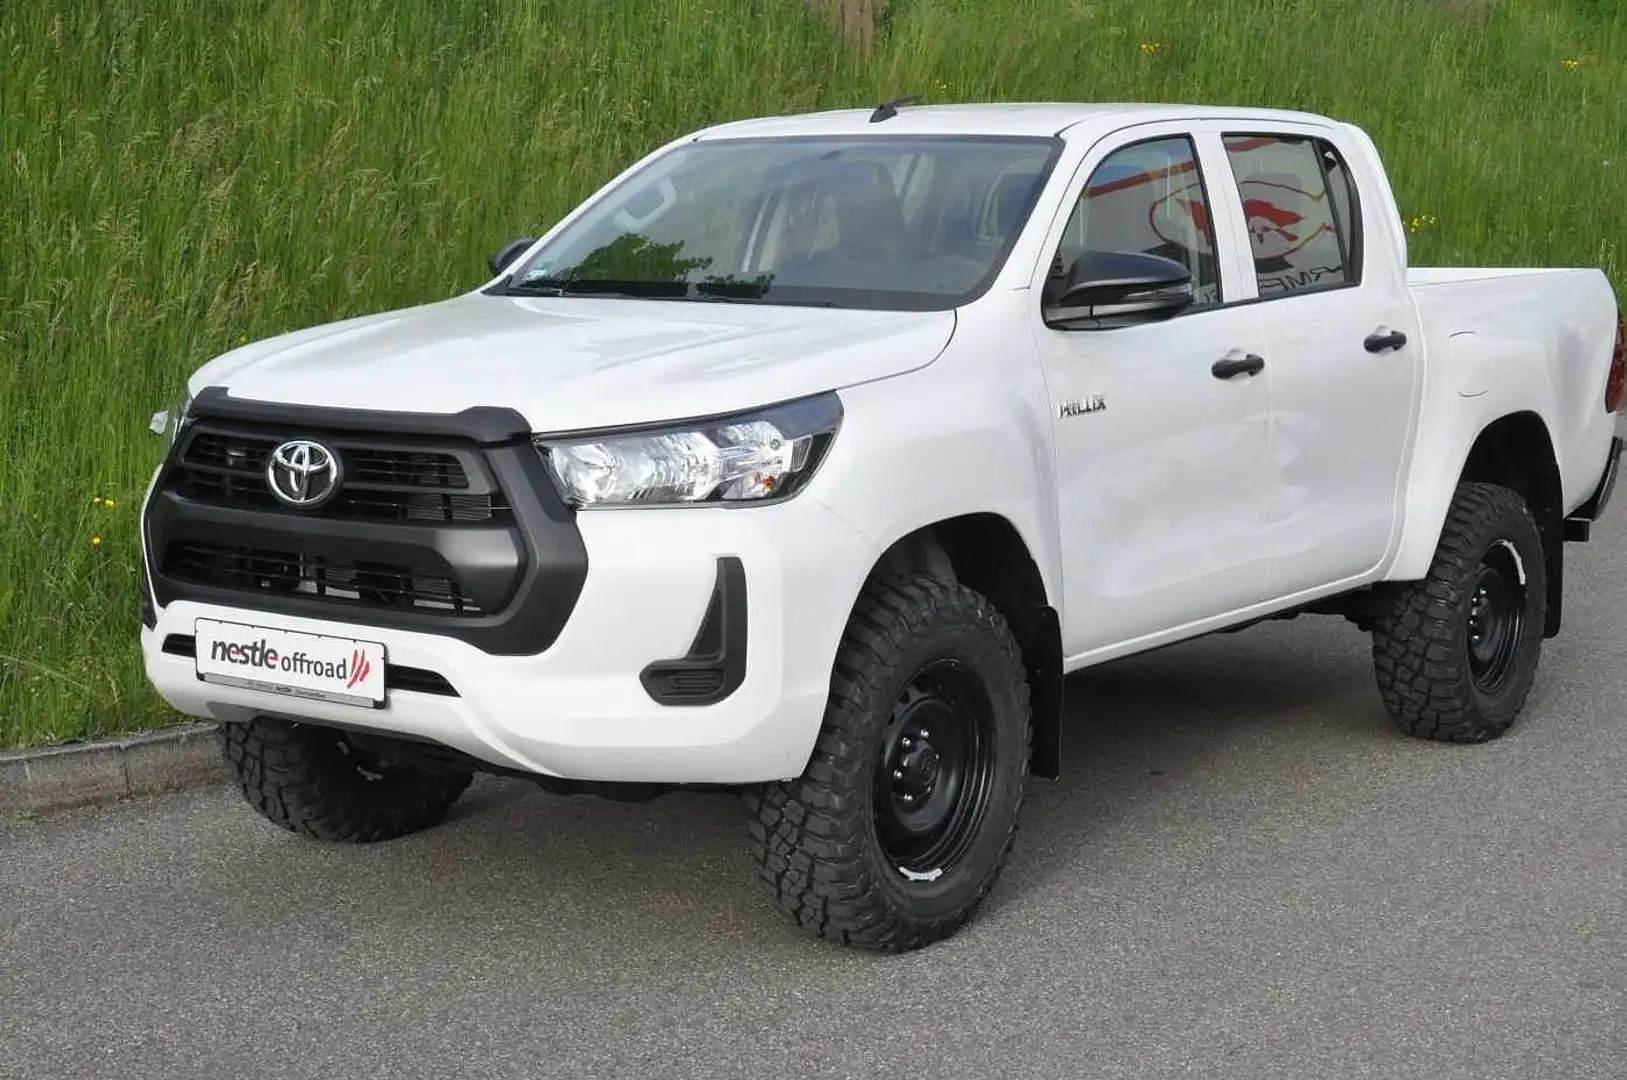 Toyota Hilux 2.4 4x4 Double Cab Duty NESTLE OFFROAD Weiß - 1